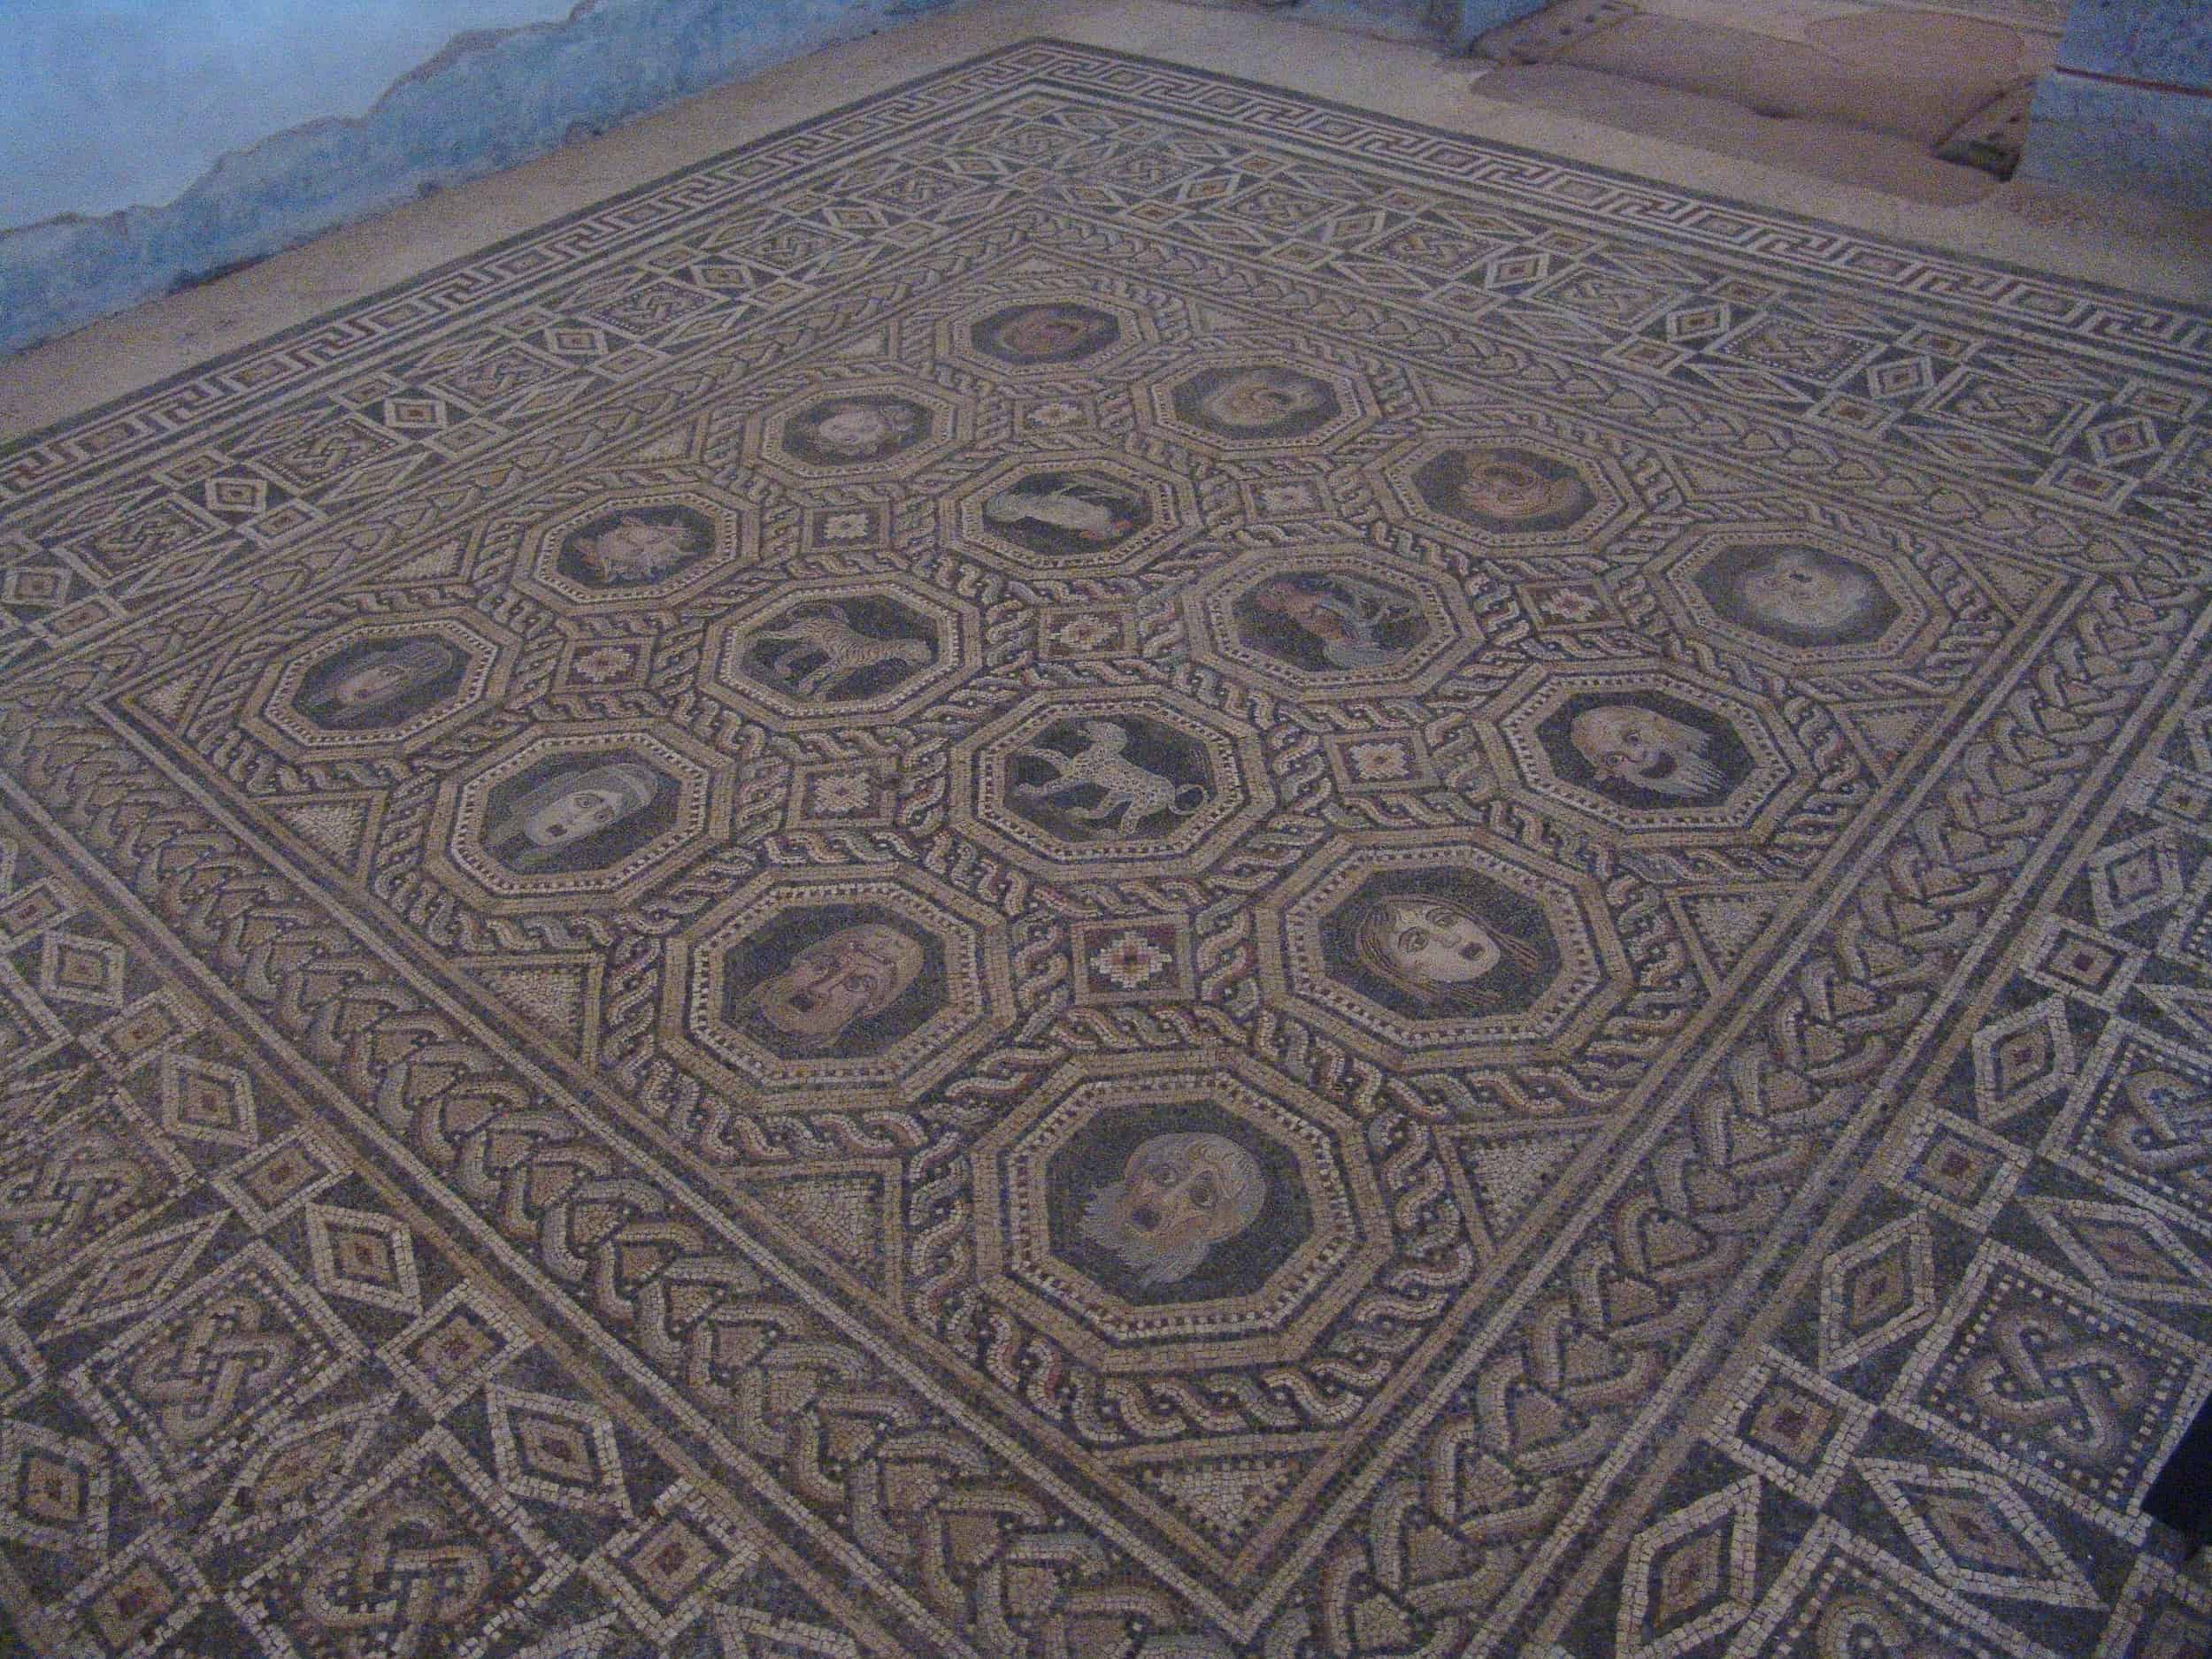 Mosaic floor of Building Z in the Lower Acropolis of Pergamon